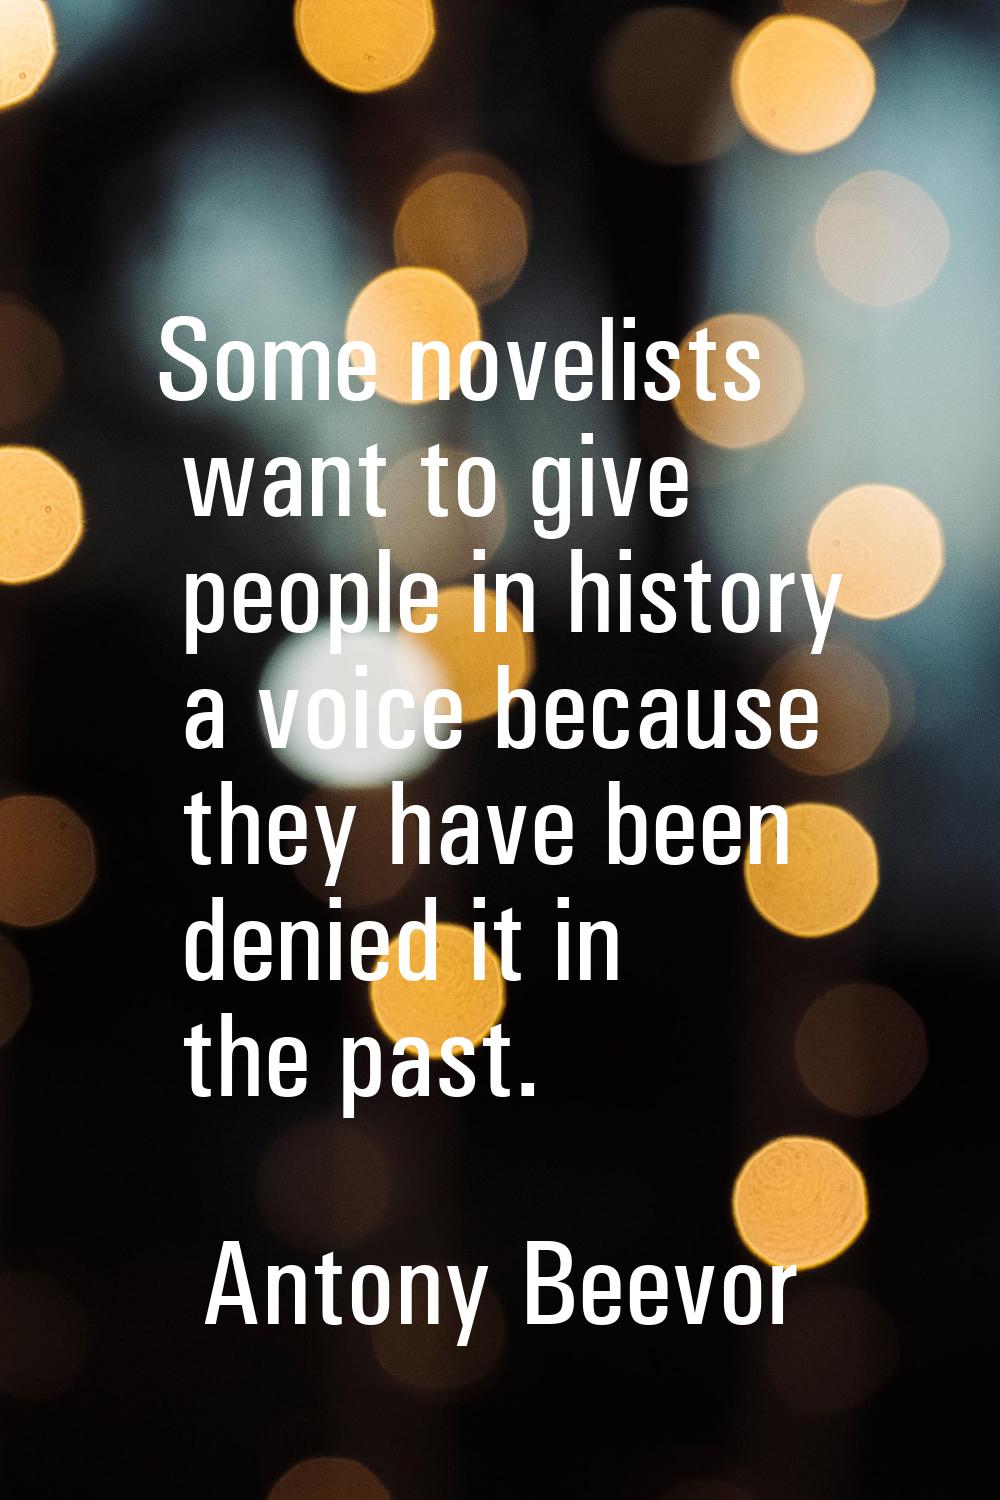 Some novelists want to give people in history a voice because they have been denied it in the past.